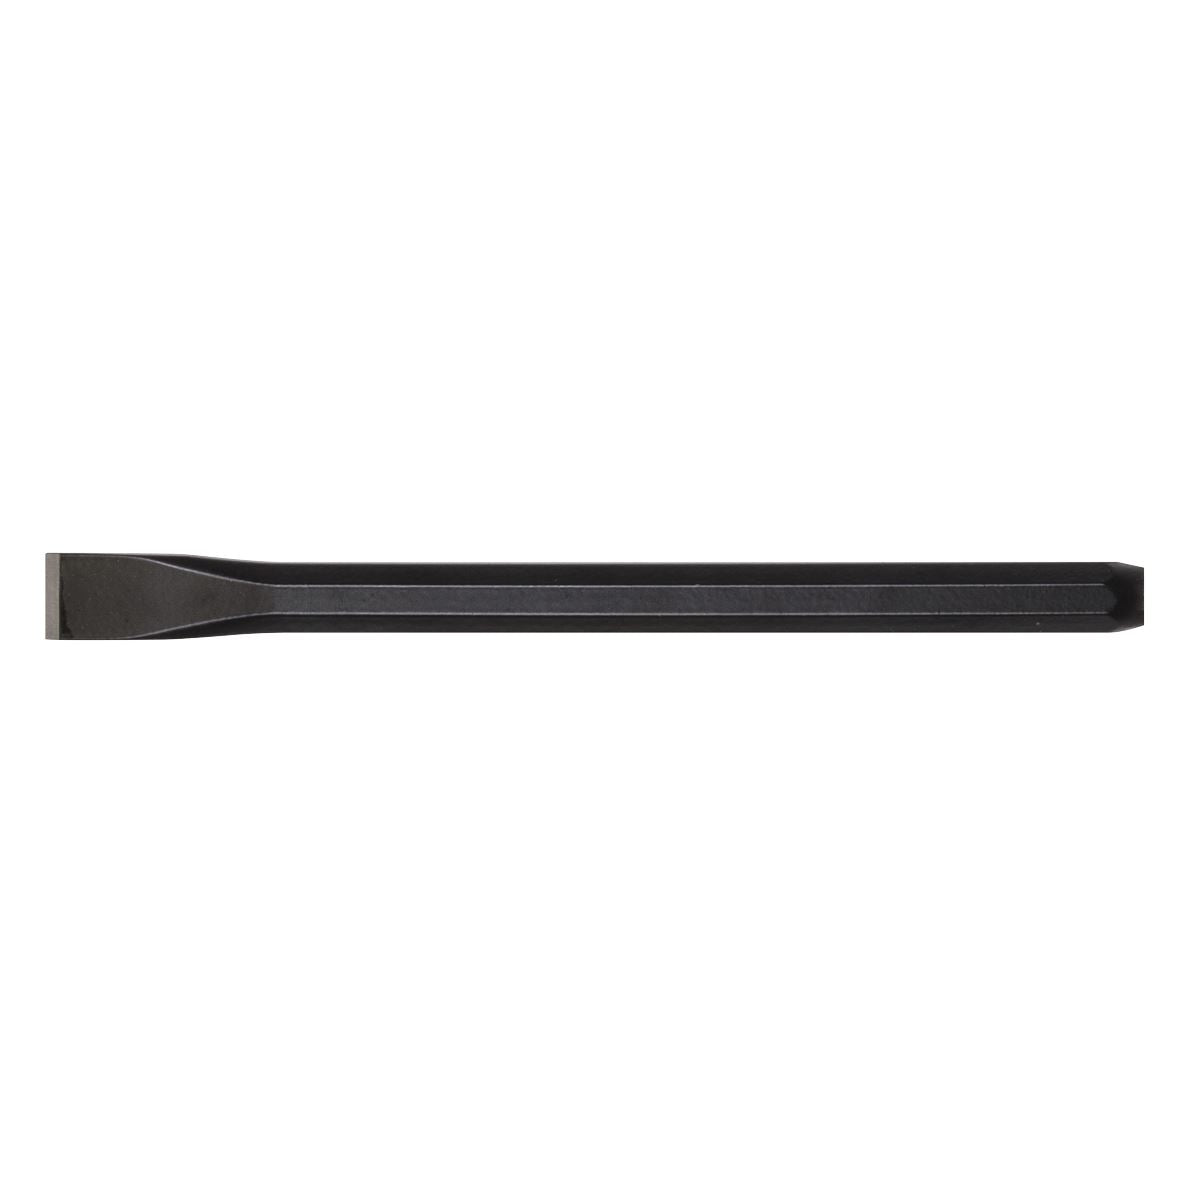 Sealey Cold Chisel 19 x 250mm